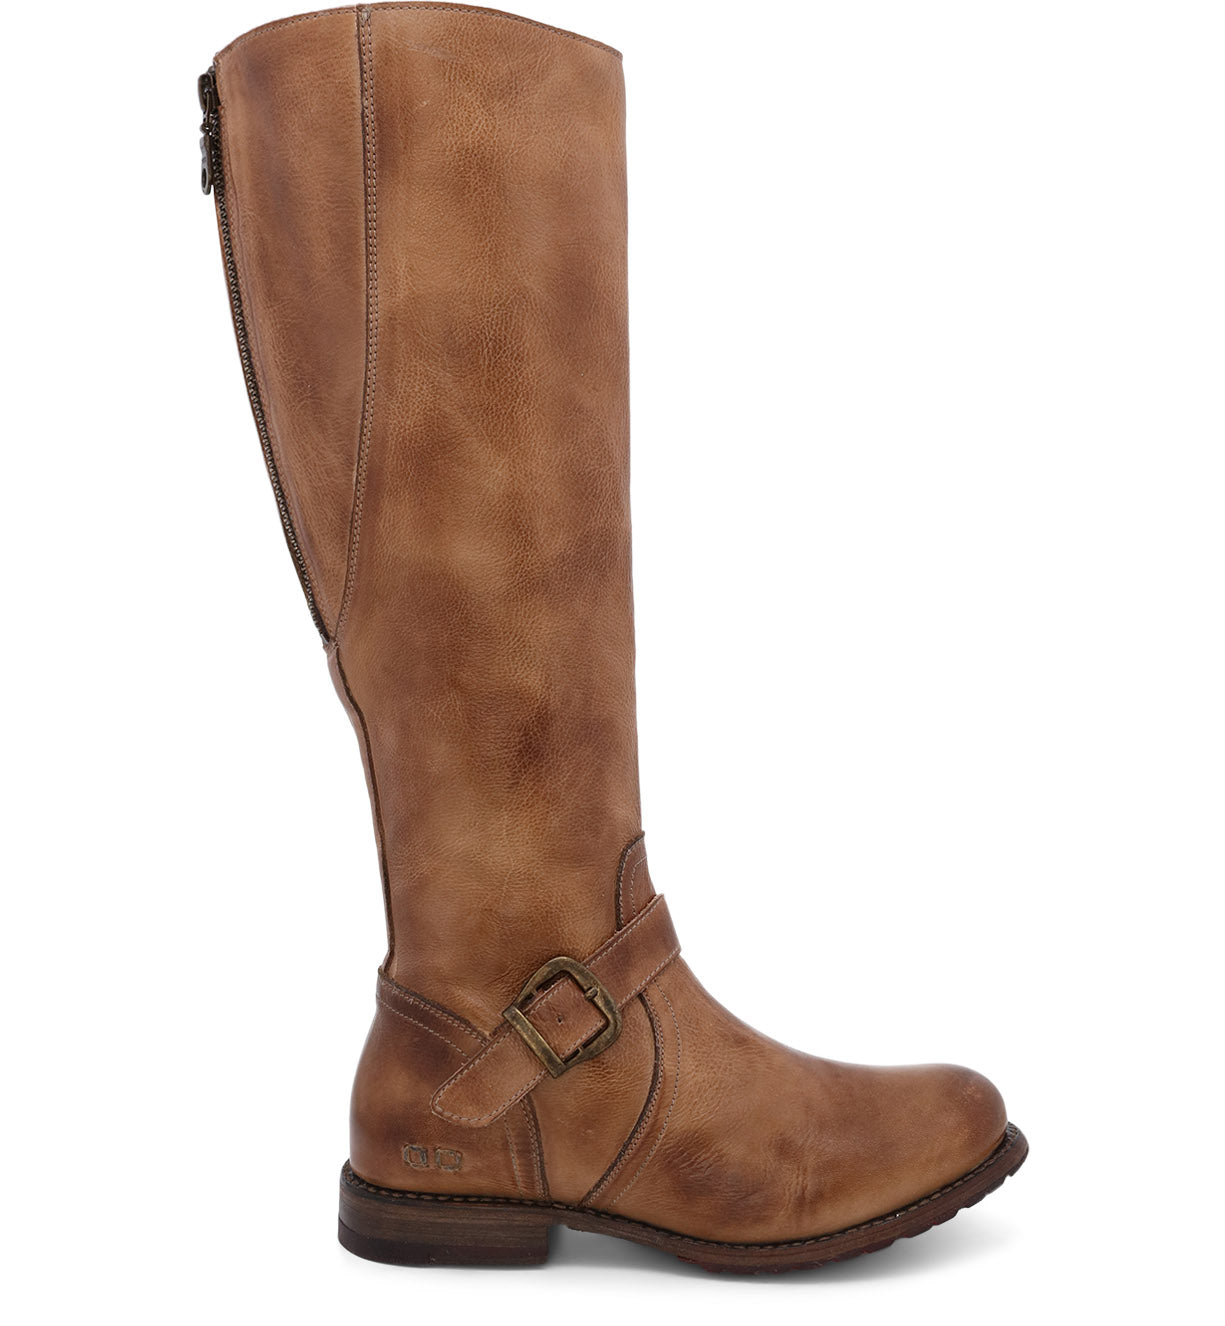 A women's Glaye tan riding boot with buckles and buckles by Bed Stu.